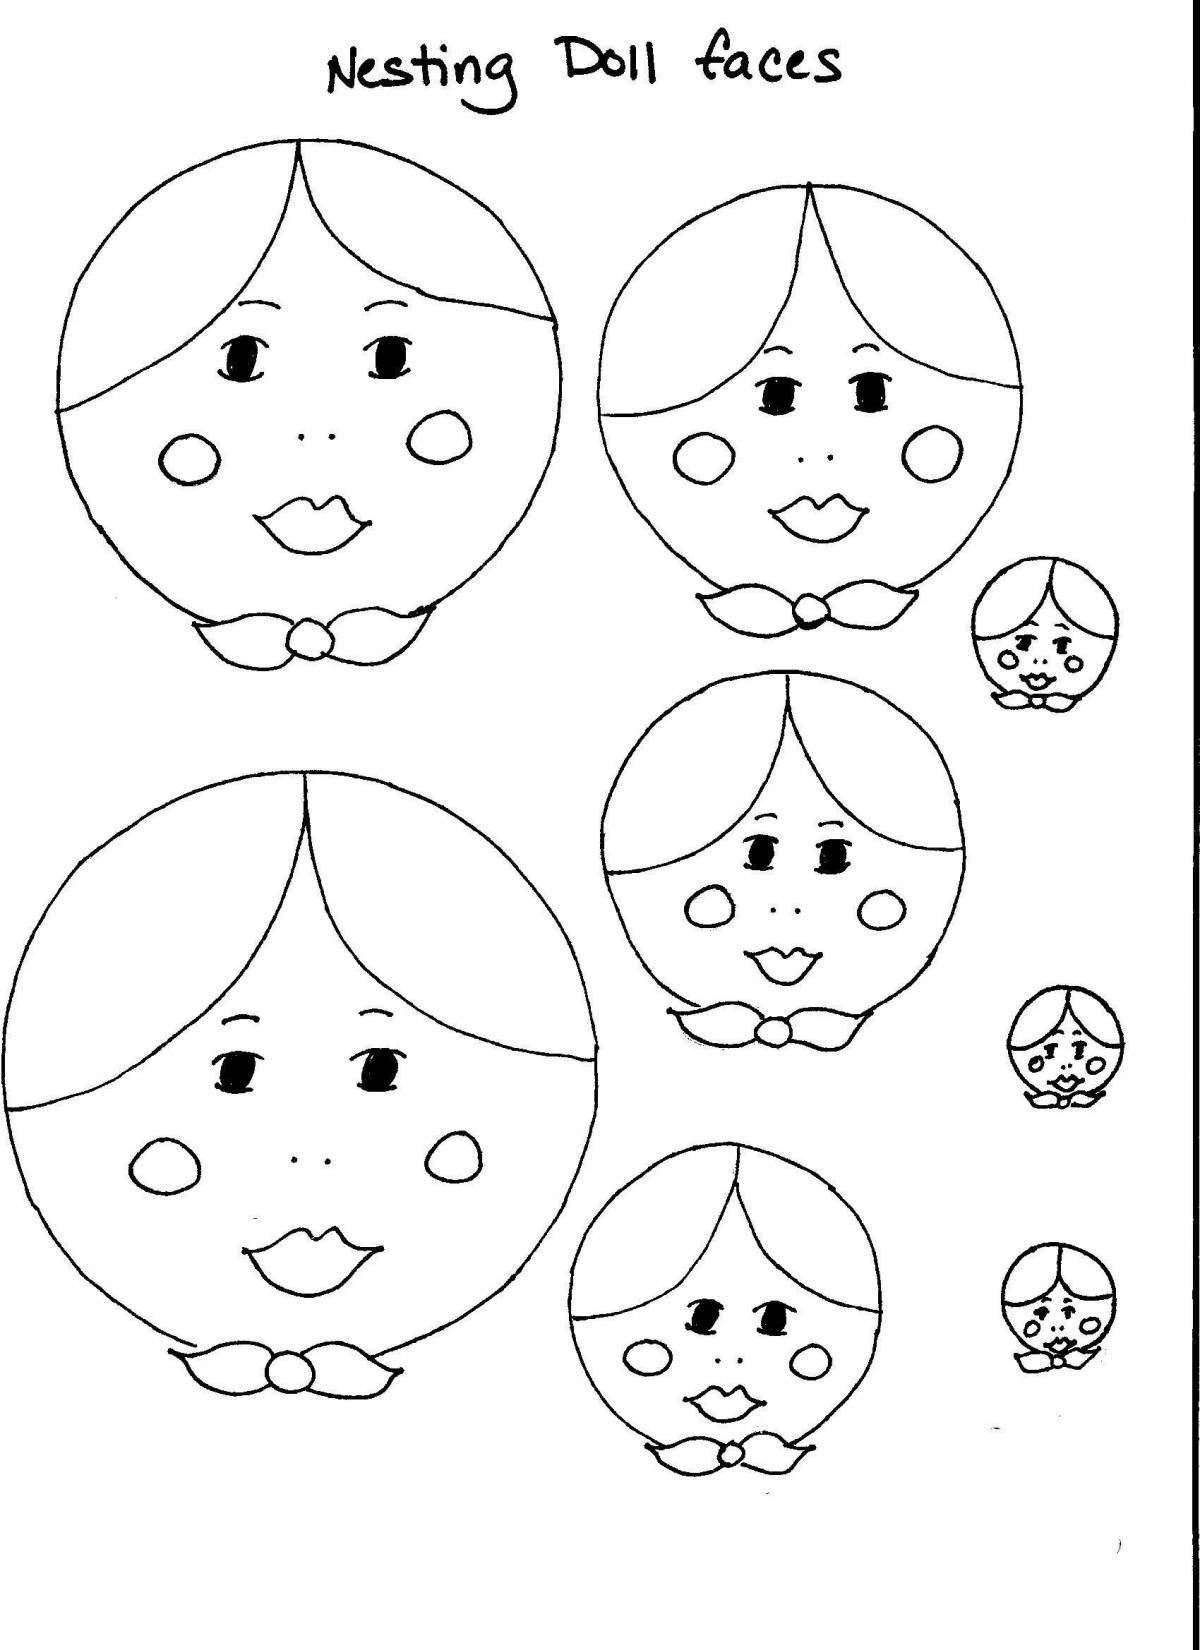 Gorgeous doll head coloring page